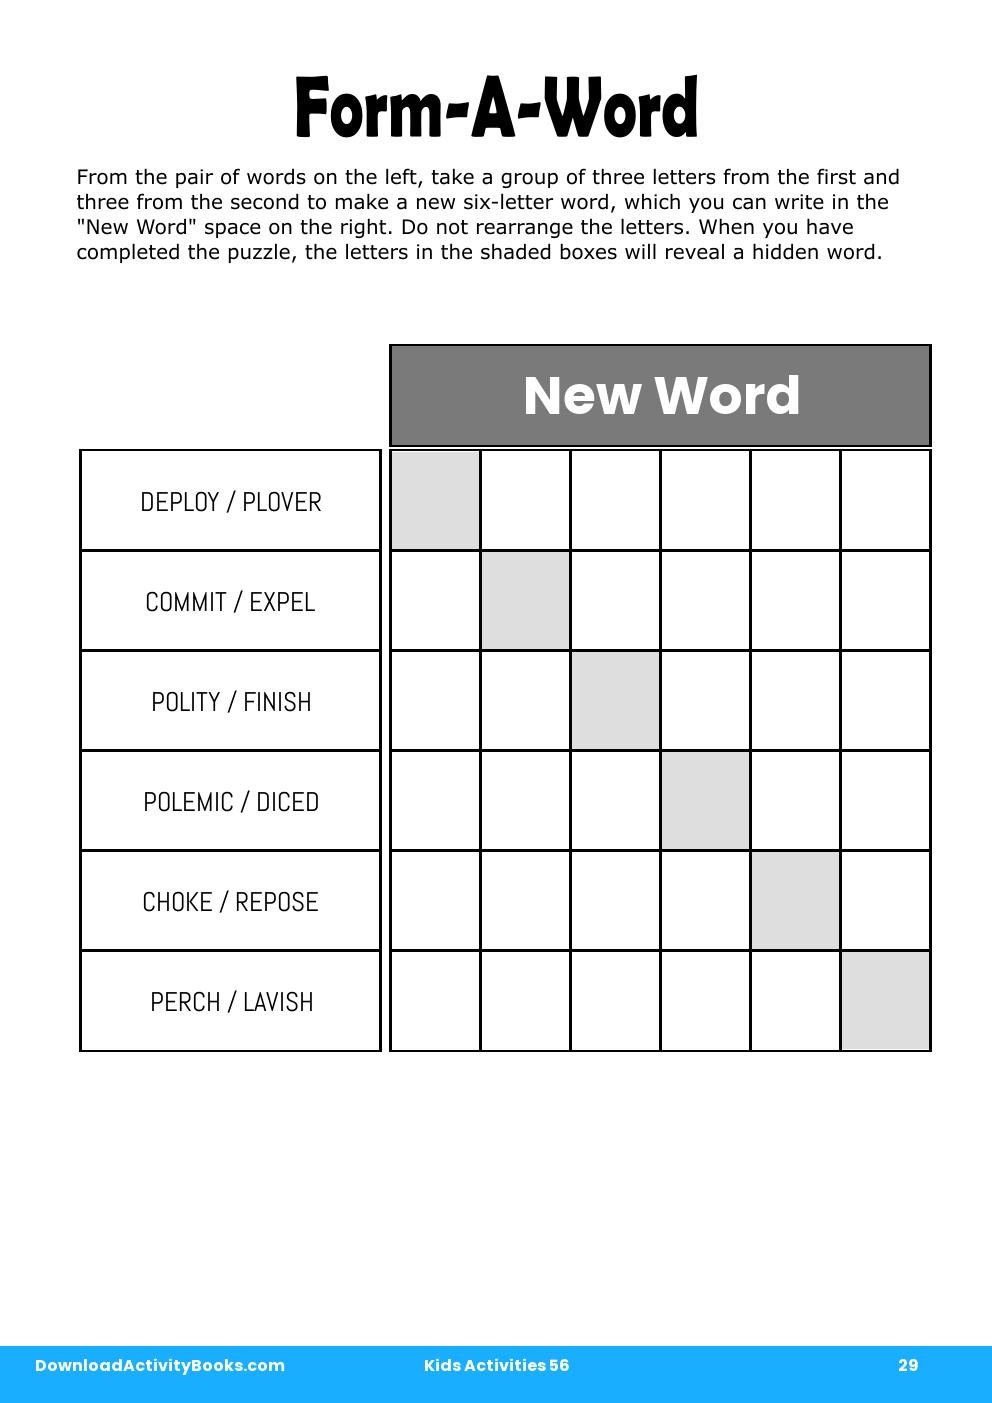 Form-A-Word in Kids Activities 56